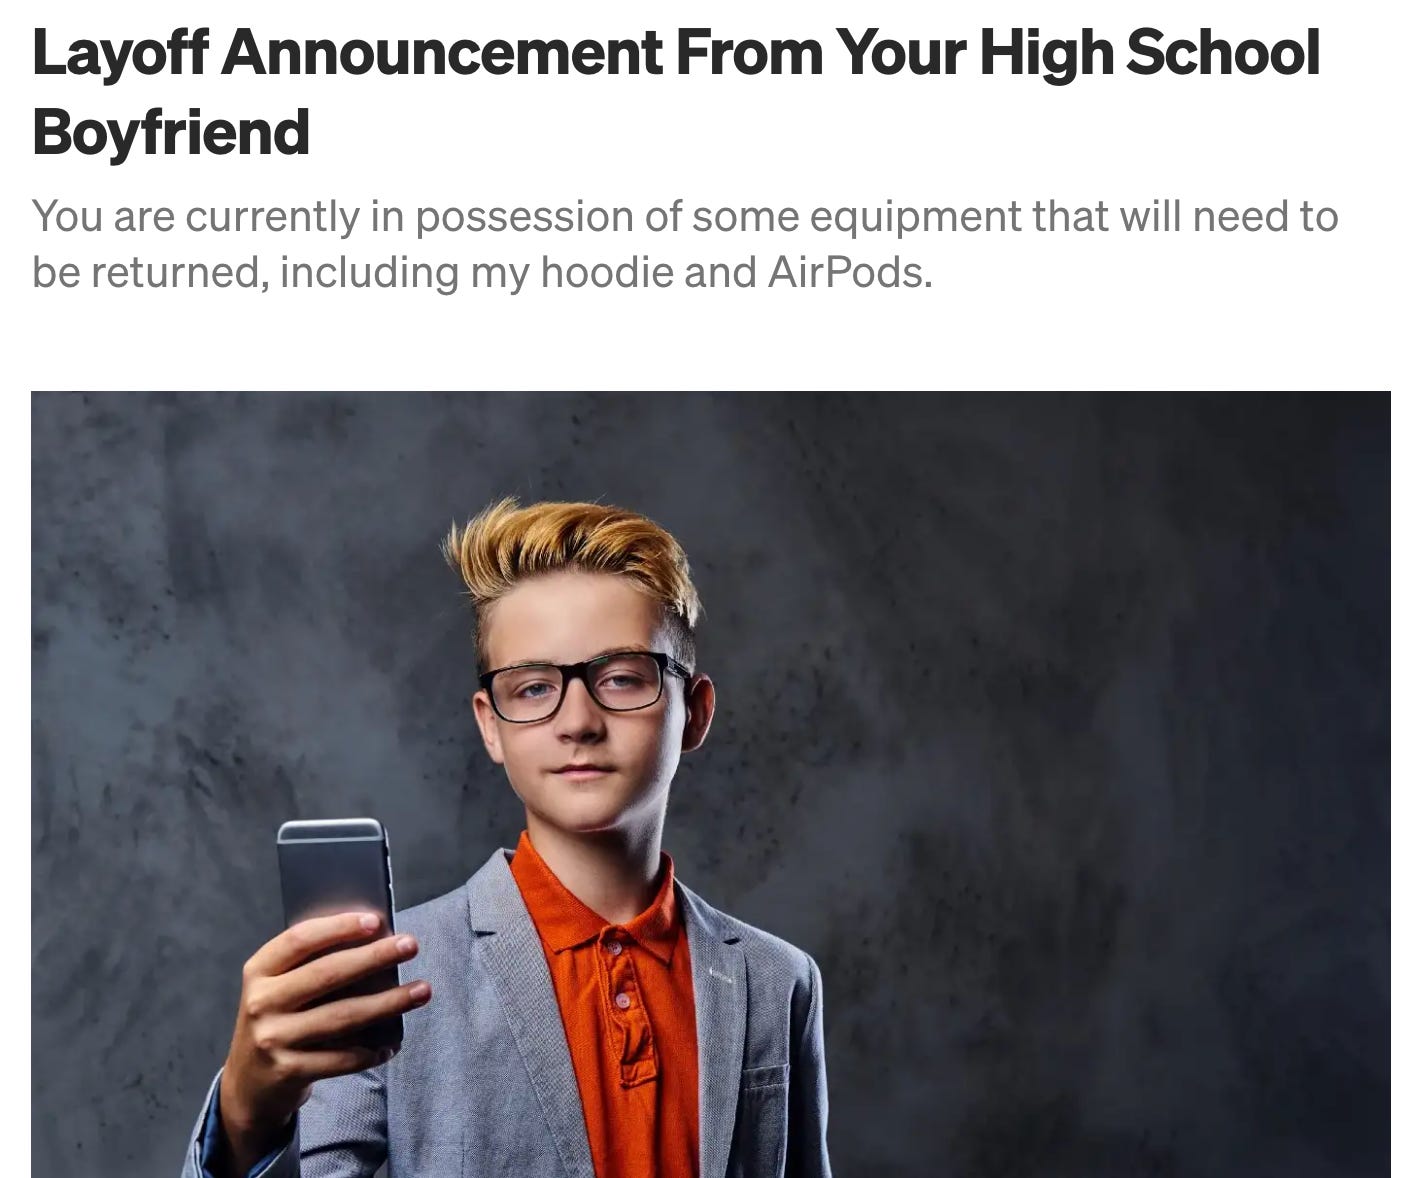 title for satire piece along with image of a smug looking young blond boy with glasses holding a phone and wearing a blazer